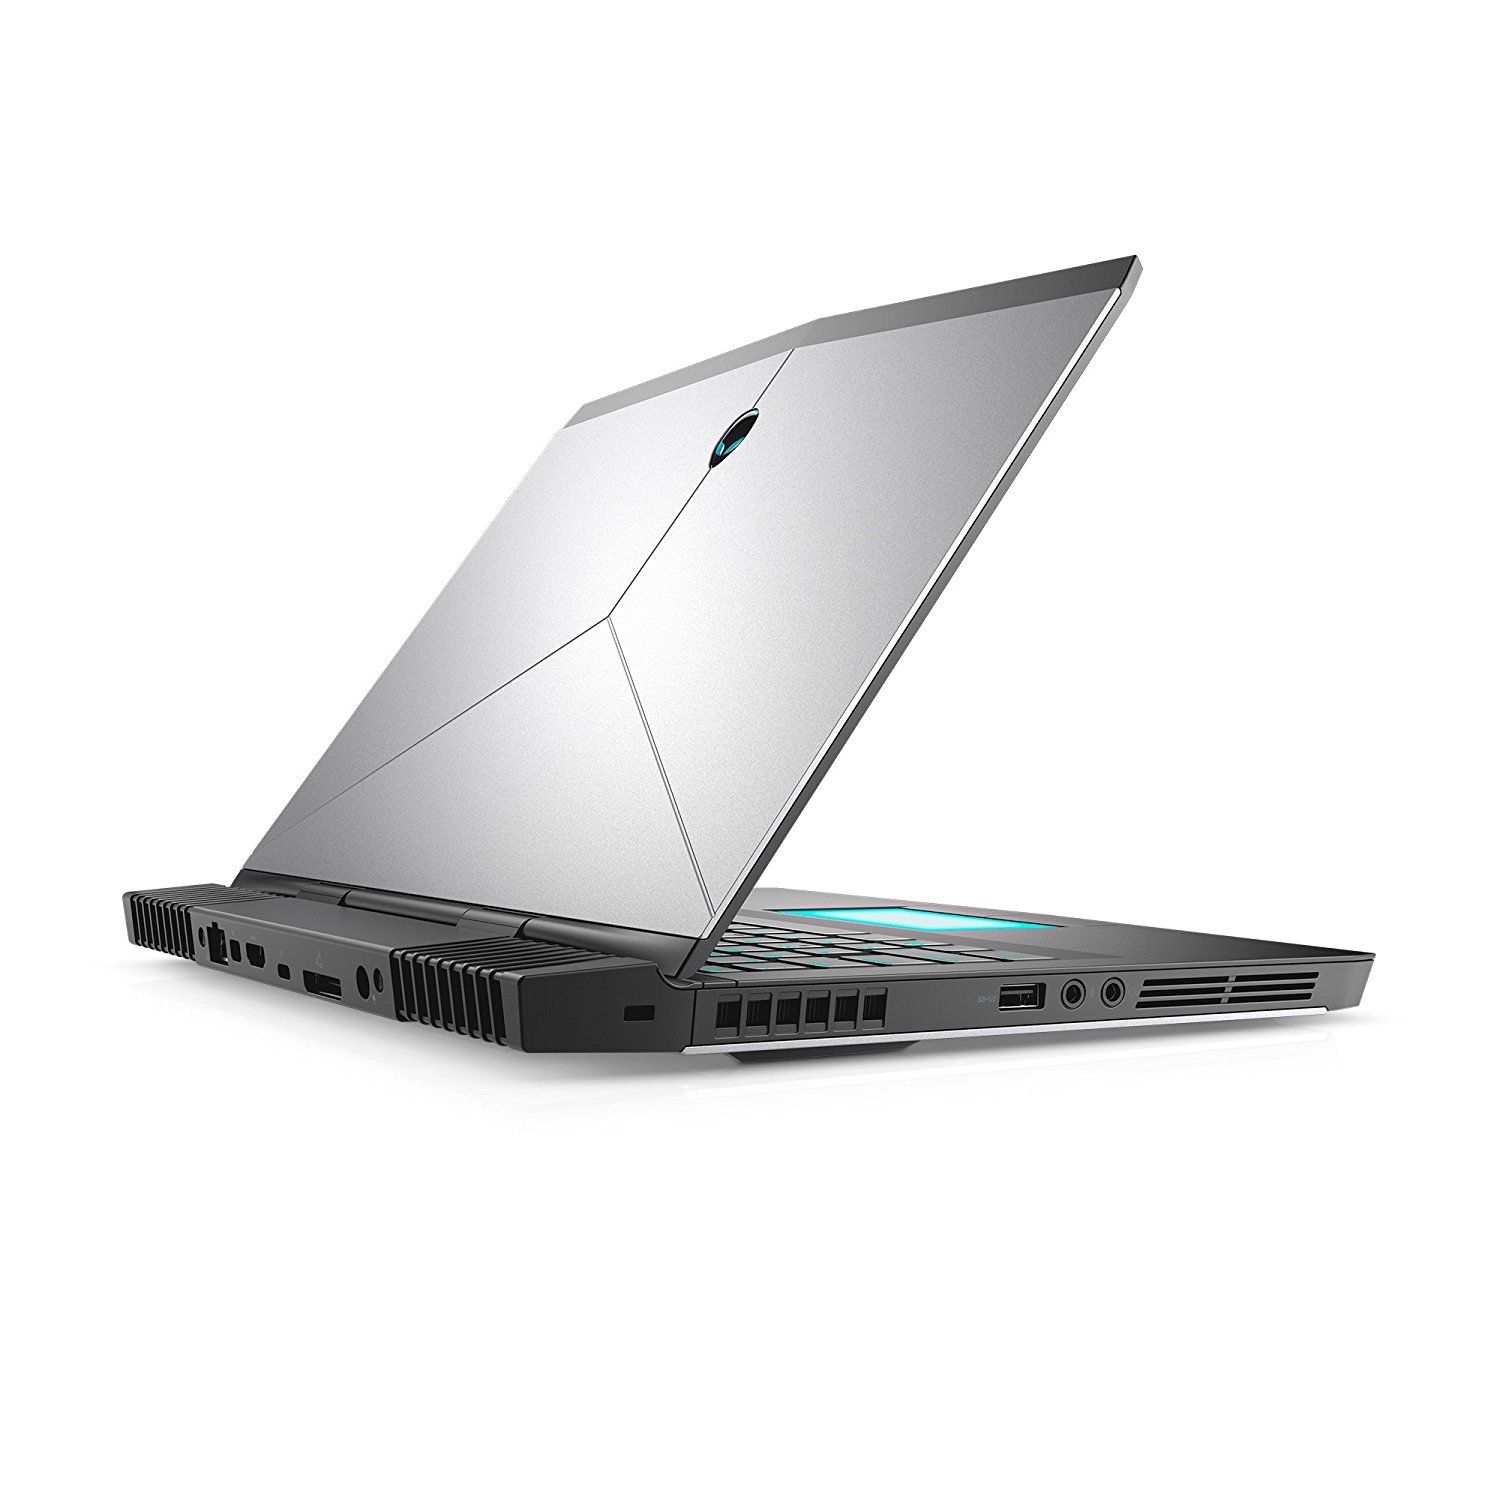 Alienware 13 R3 Intel Core i5-7300HQ up to 3.5GHz 8GB RAM 256GB ...